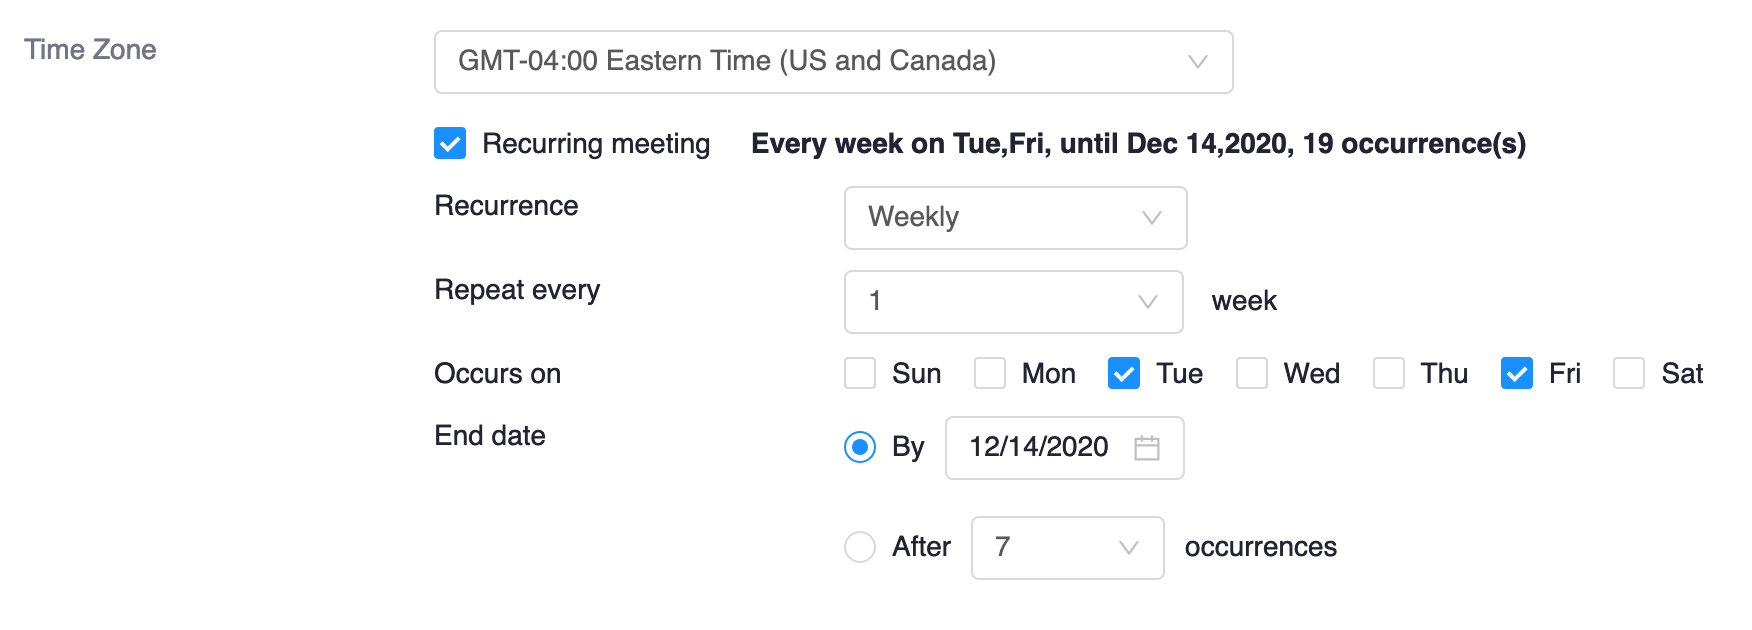 recurring meeting selection options, with weekly recurrence selected, two days of the week selected, and the end date set to the last day of classes